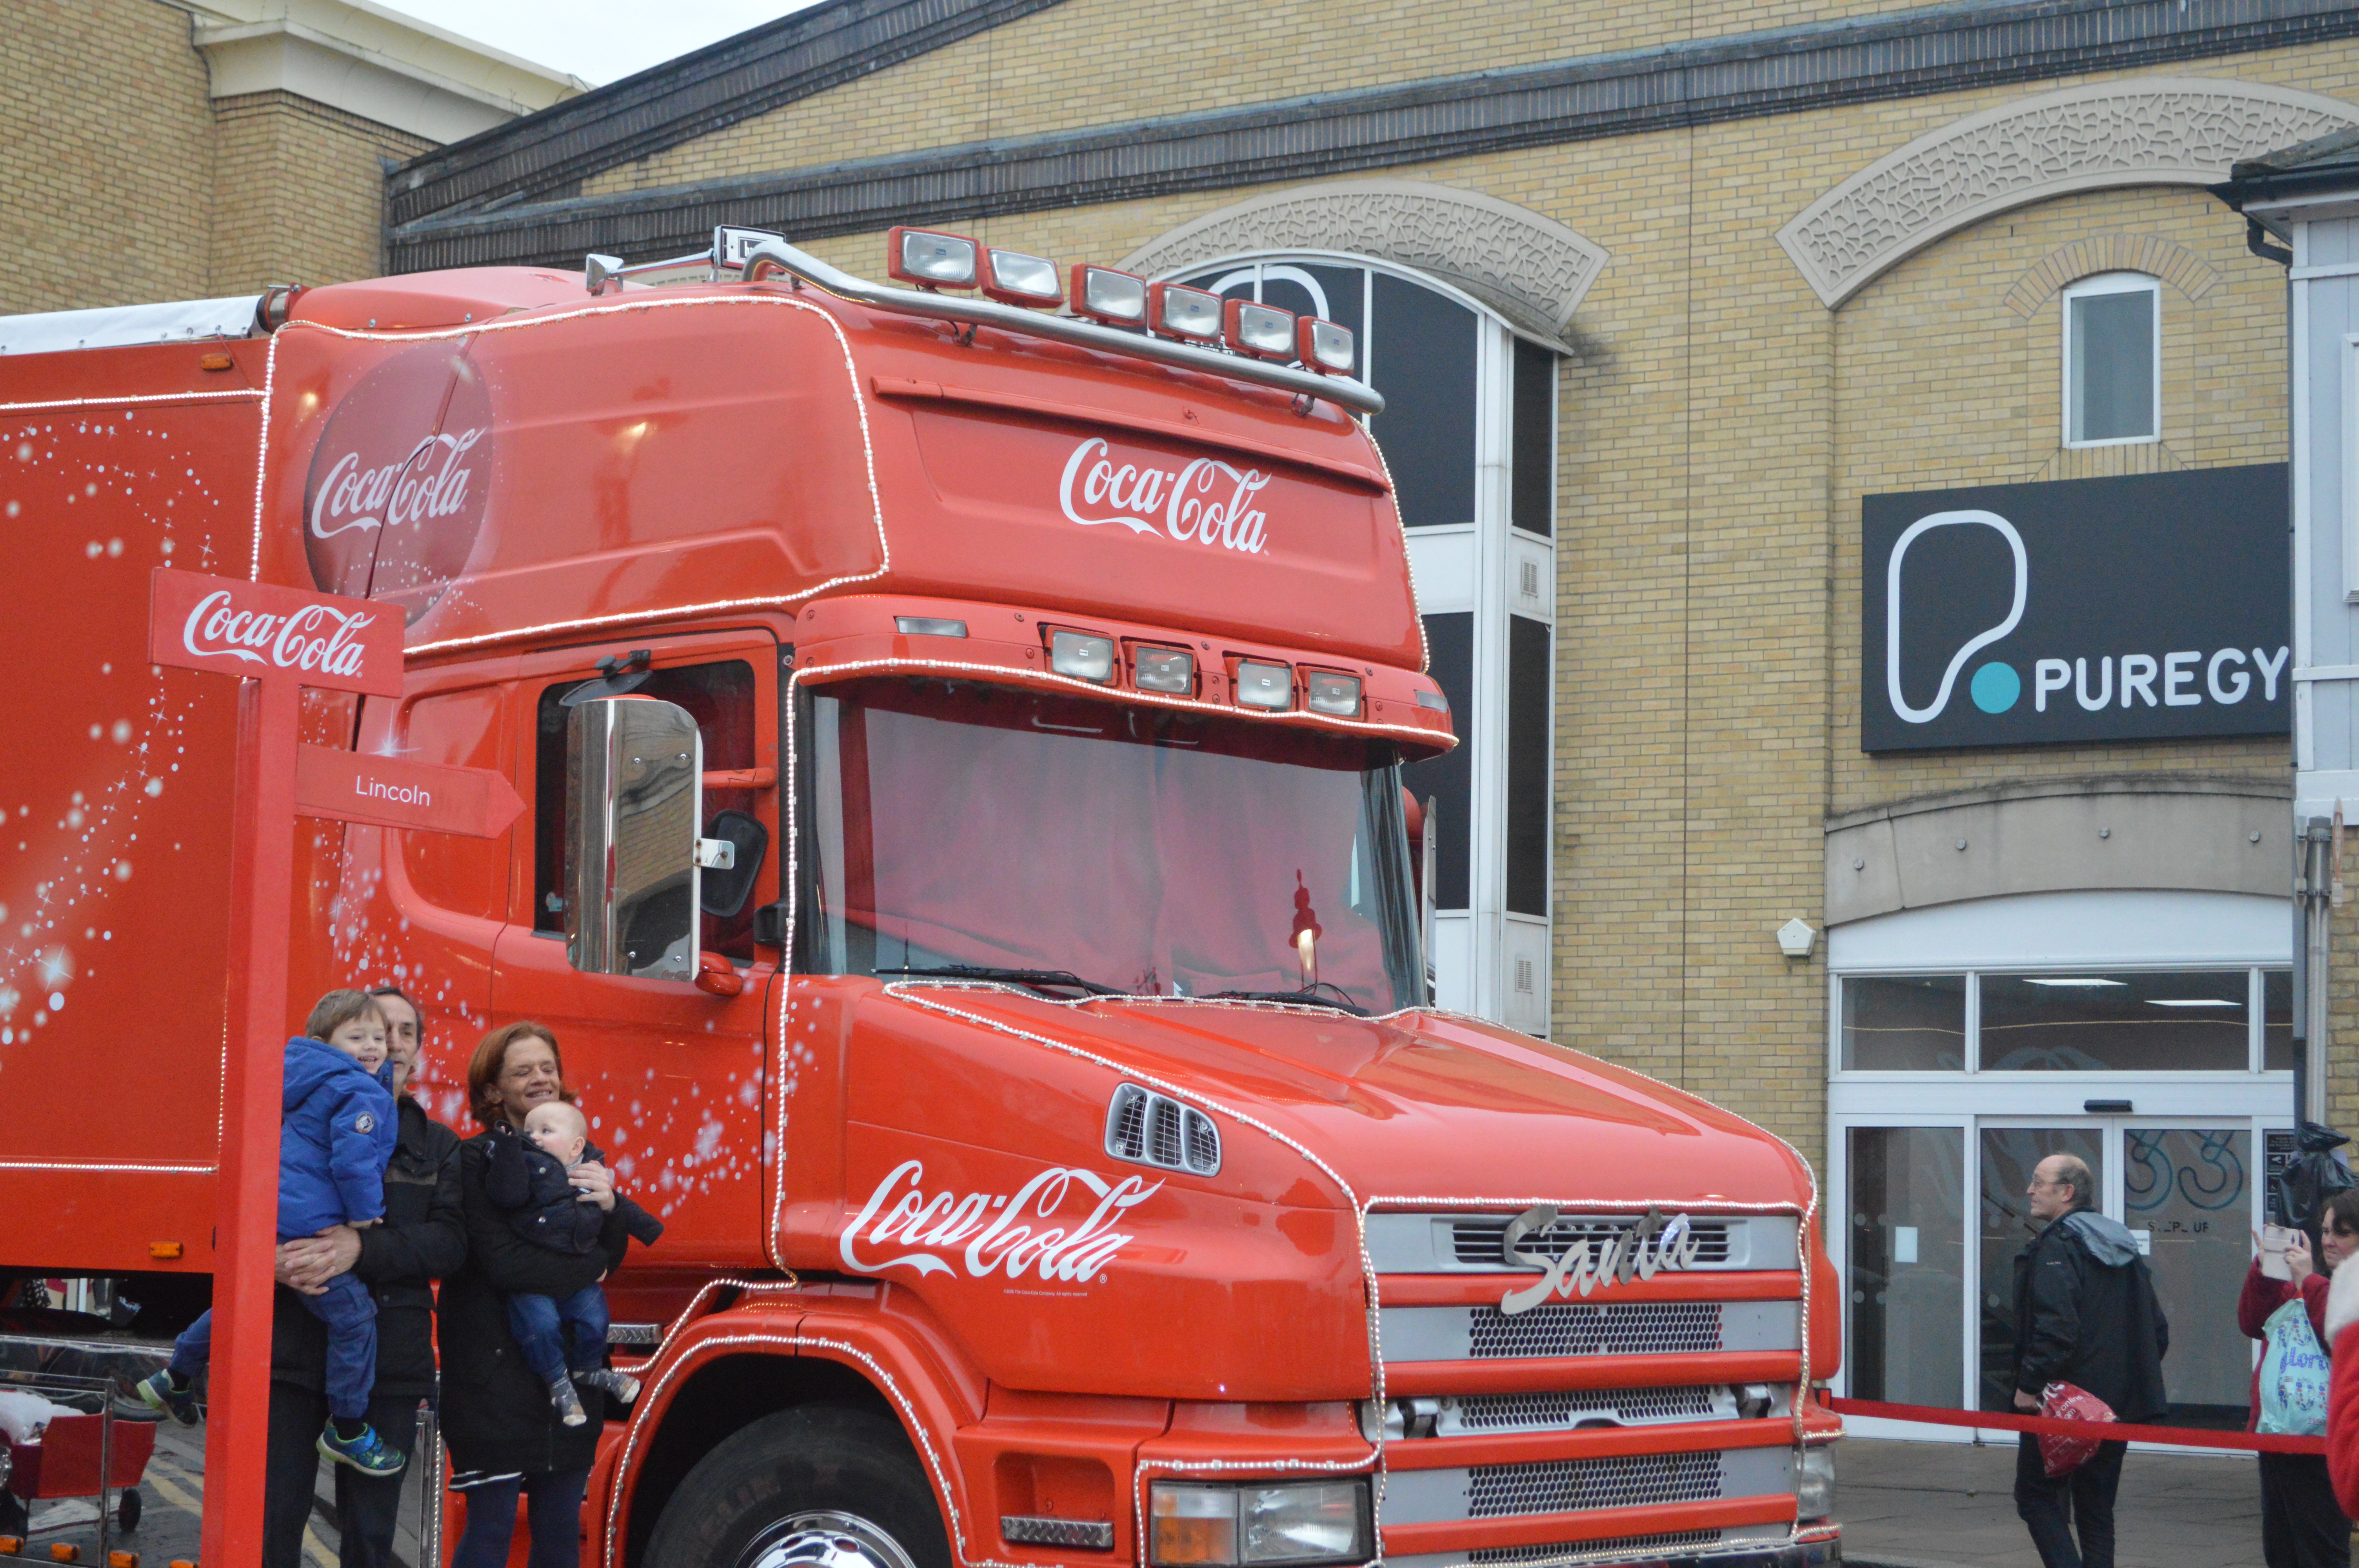 Coca Cola truck in front of a gym. Photo Credit: Max Norstrom